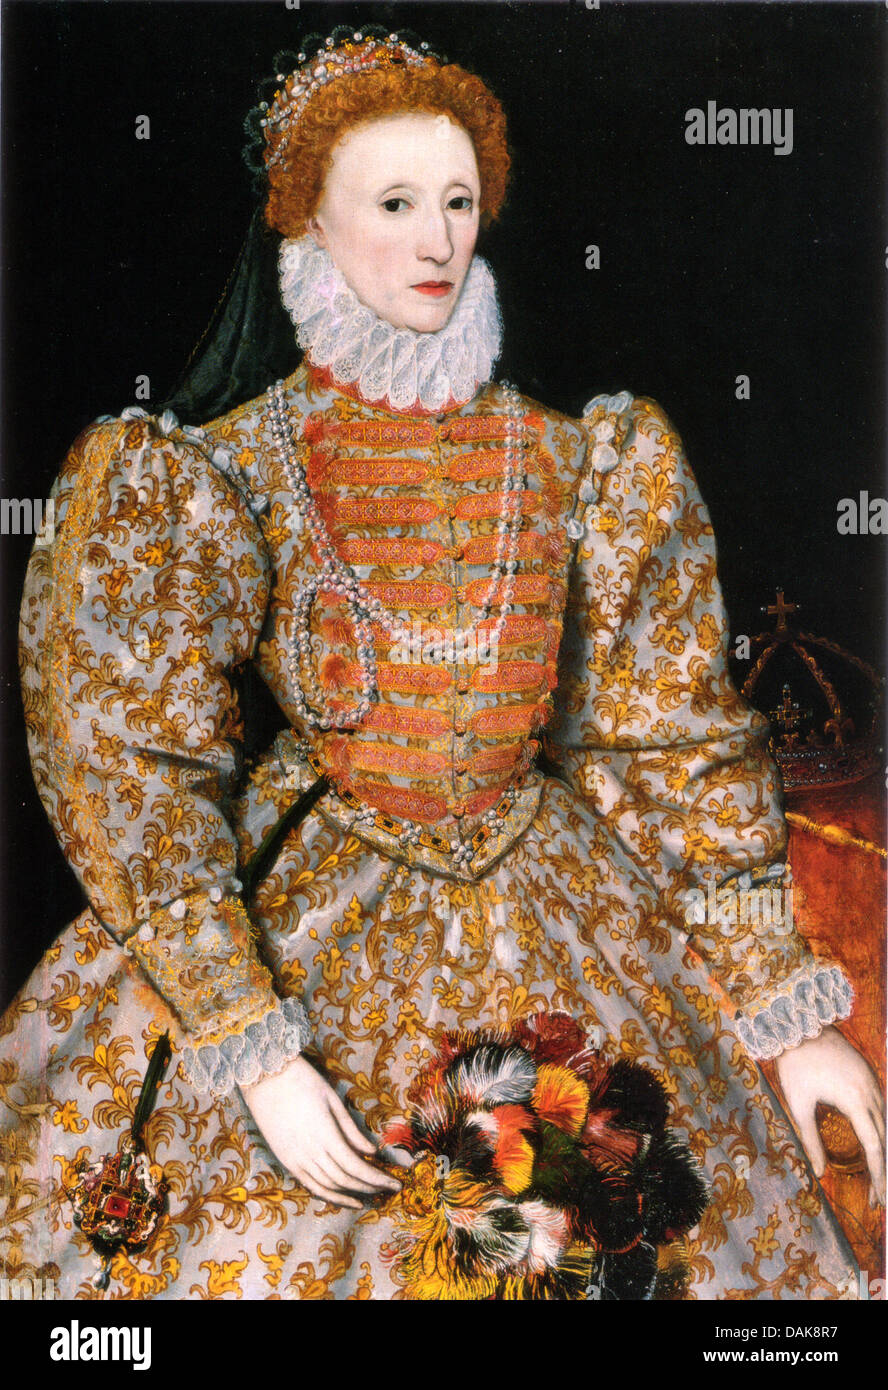 QUEEN ELIZABETH I of ENGLAND (1533-1603) in the 'Darnley' portrait painted by an unknown artist about 1575 Stock Photo